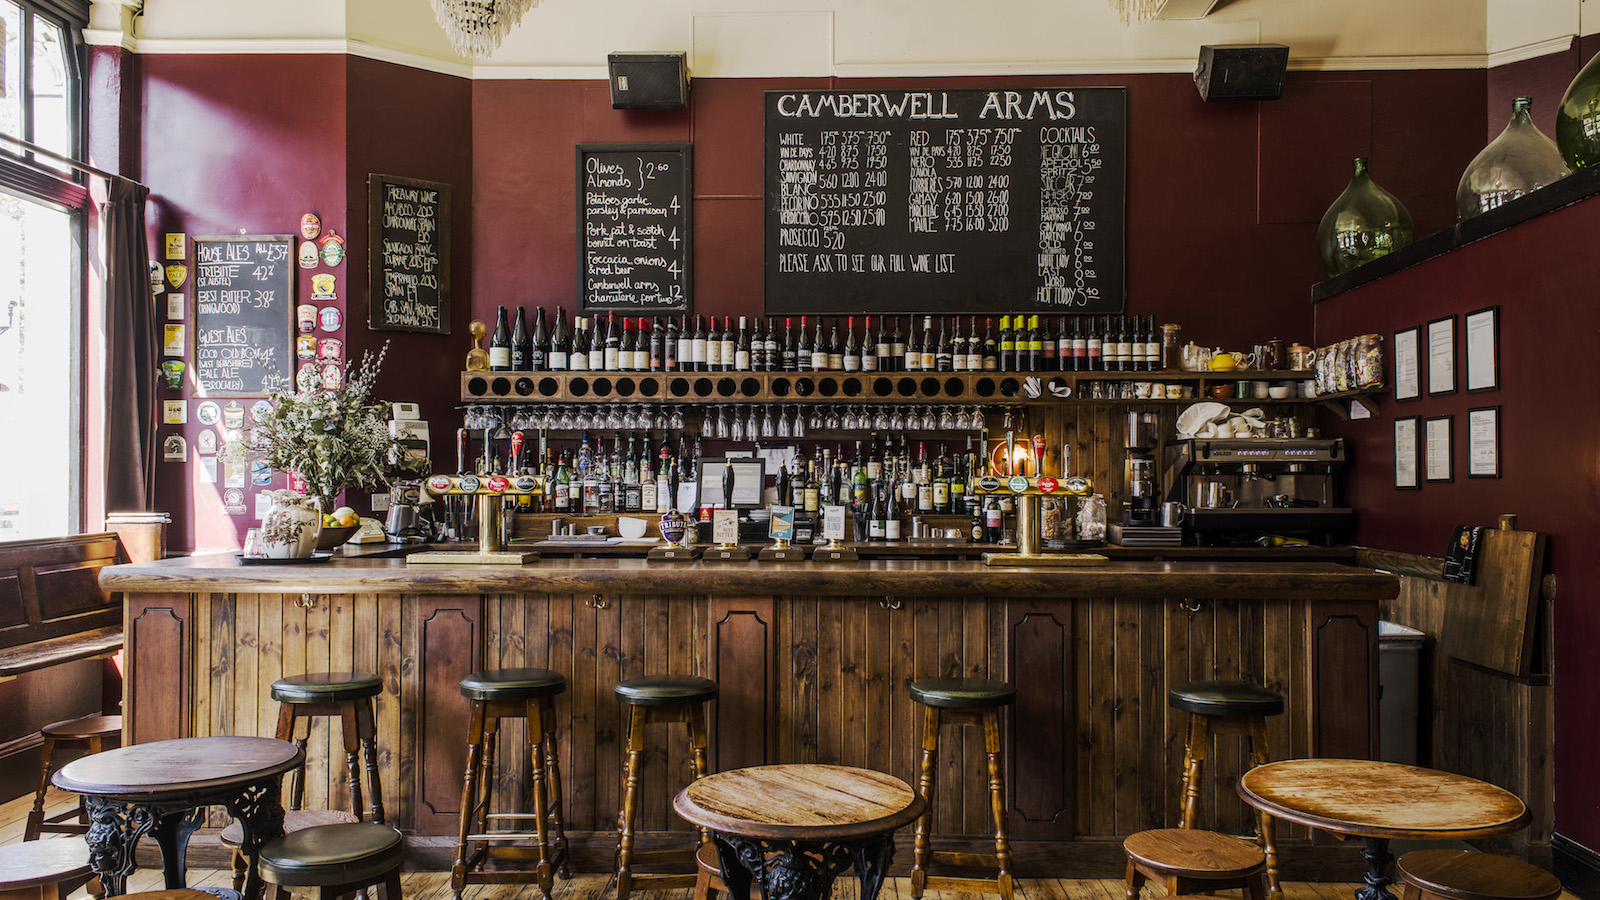 Camberwell arms